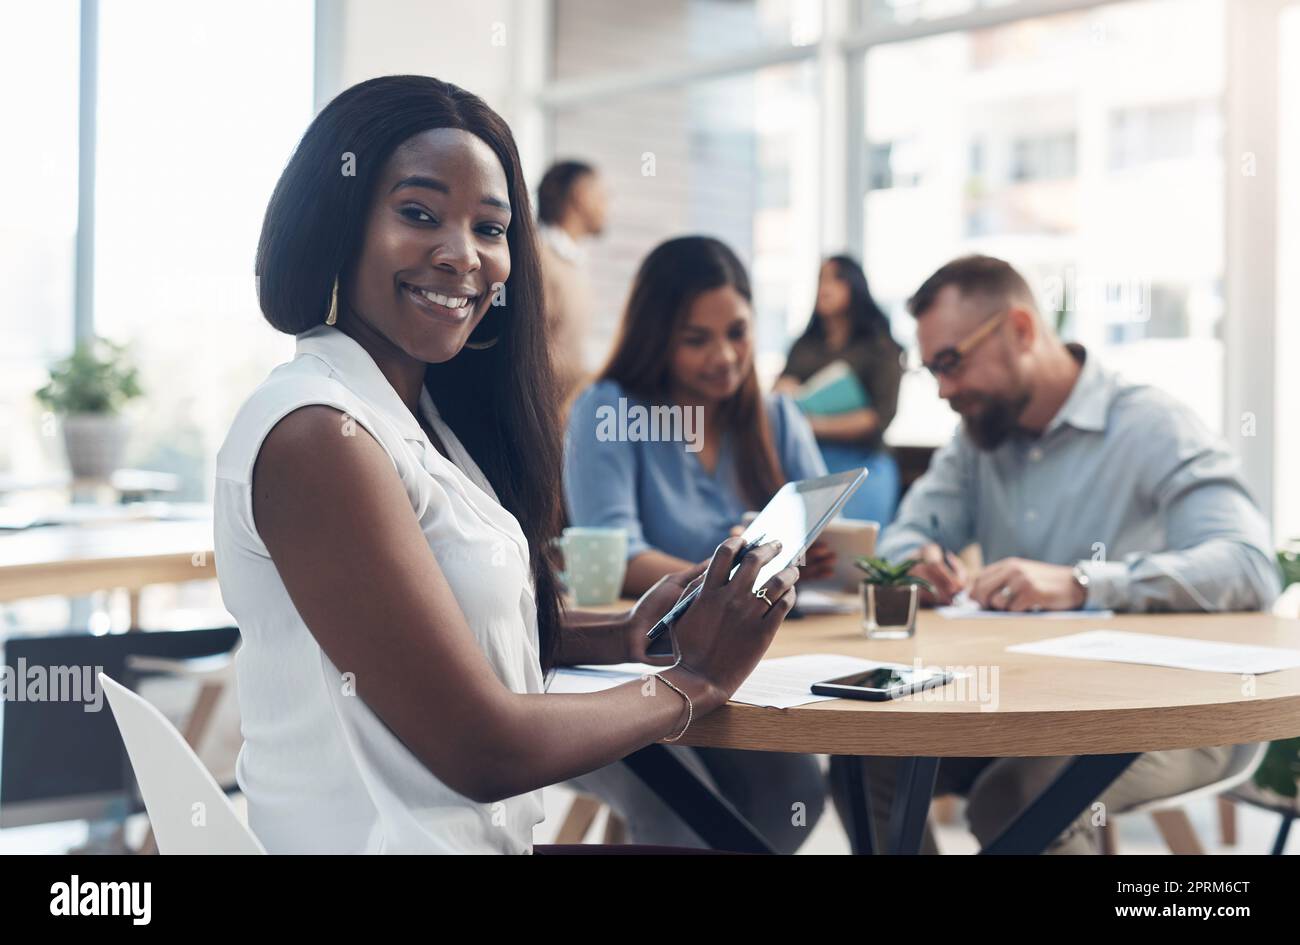 Im on the correct career path. Cropped portrait of an attractive young businesswoman sitting and using a tablet while her coworkers work behind her Stock Photo